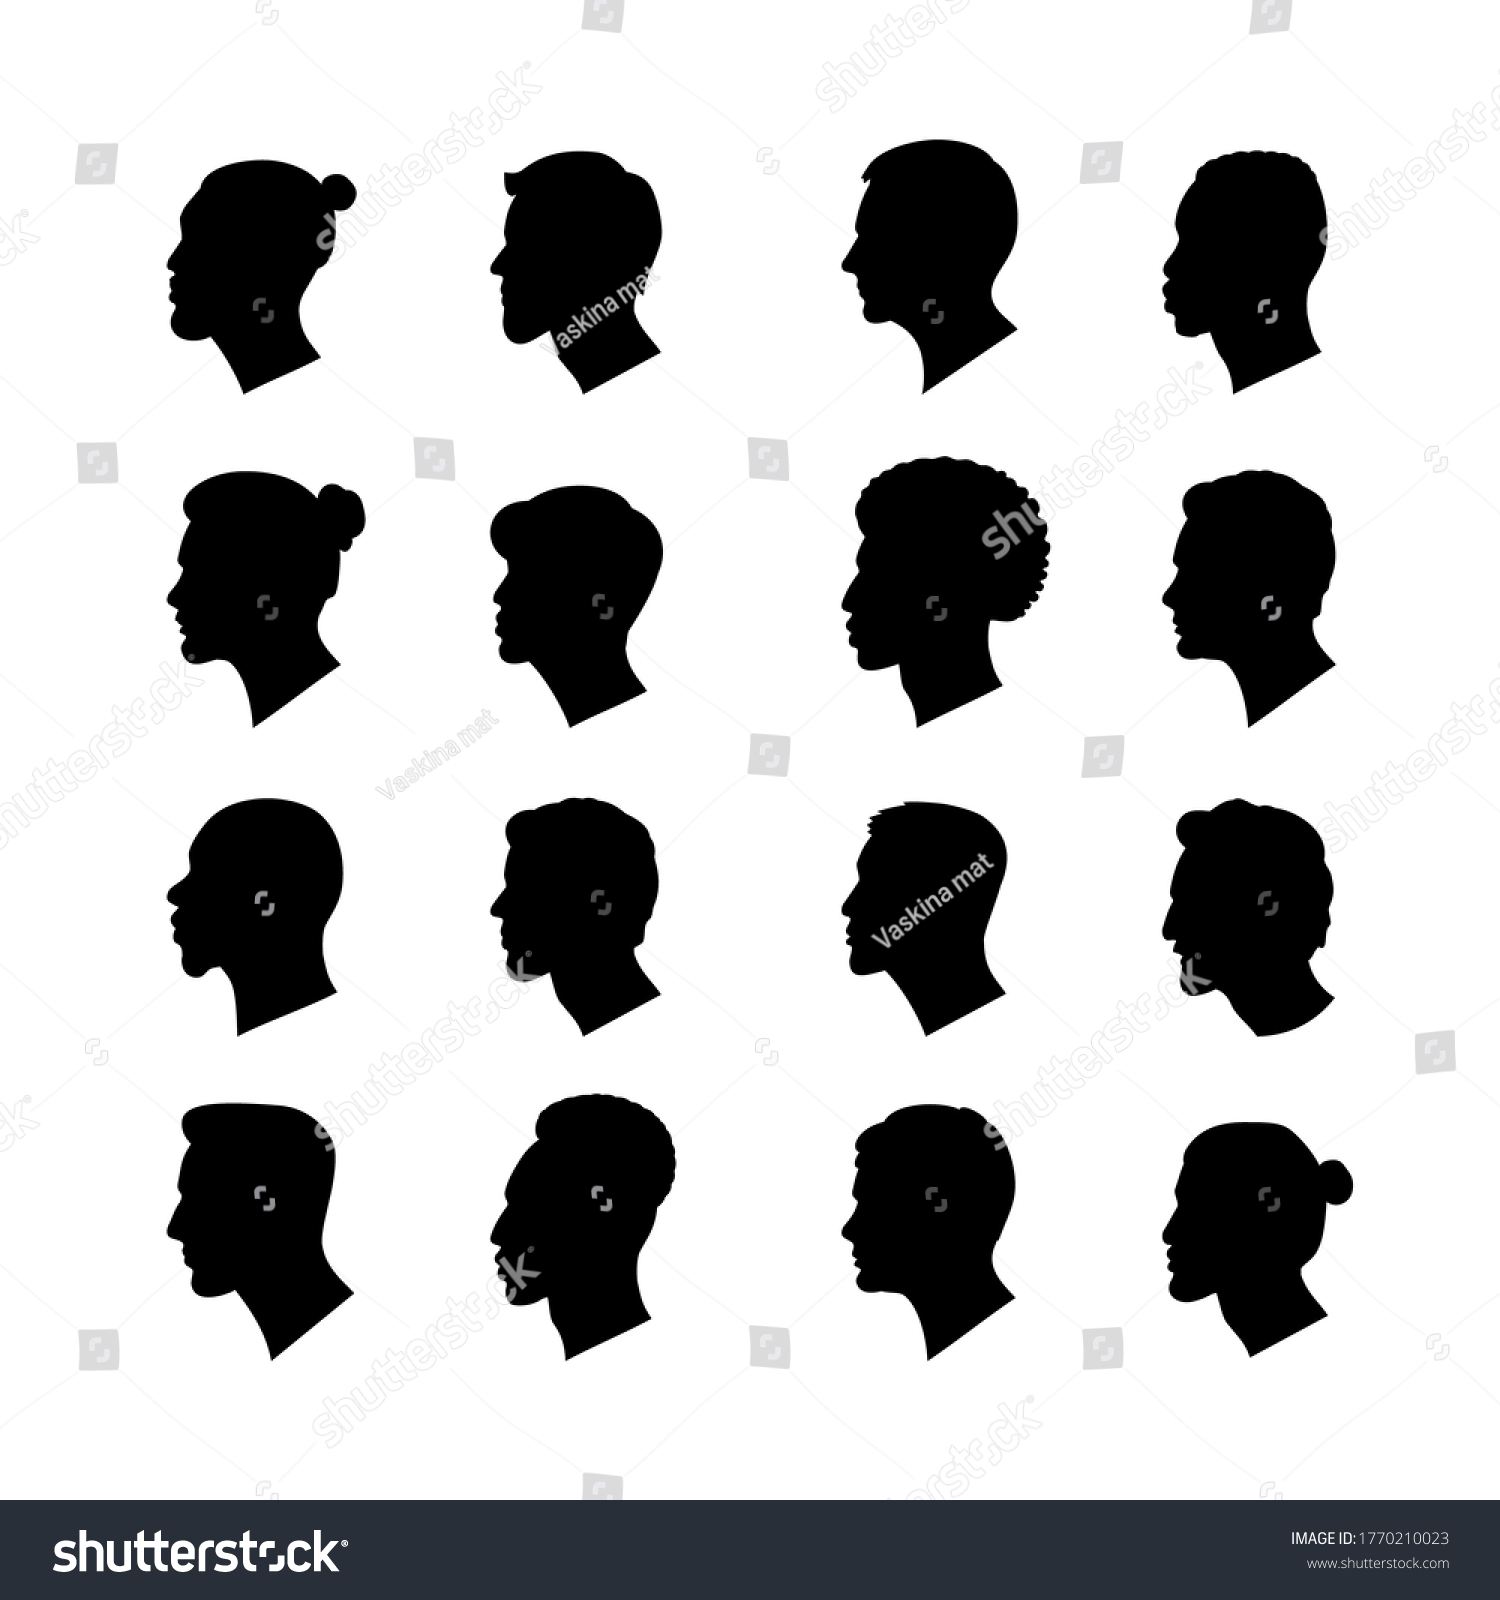 SVG of Set vector illustration of men's heads in profile of european and asian and also afro-american nationality black silhouette on a white background. svg